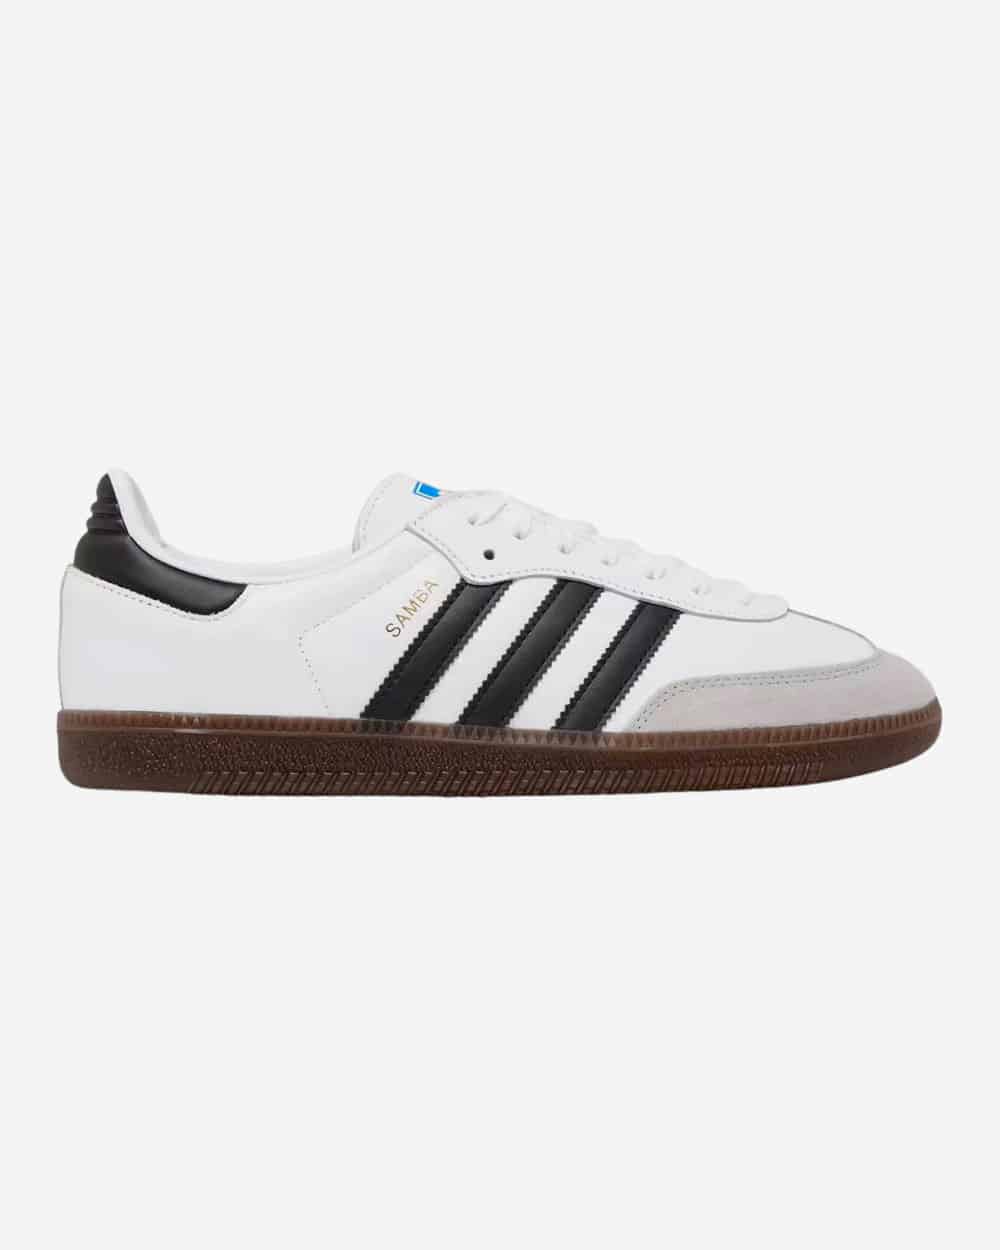 Adidas Originals Samba Suede-Trimmed Leather Sneakers